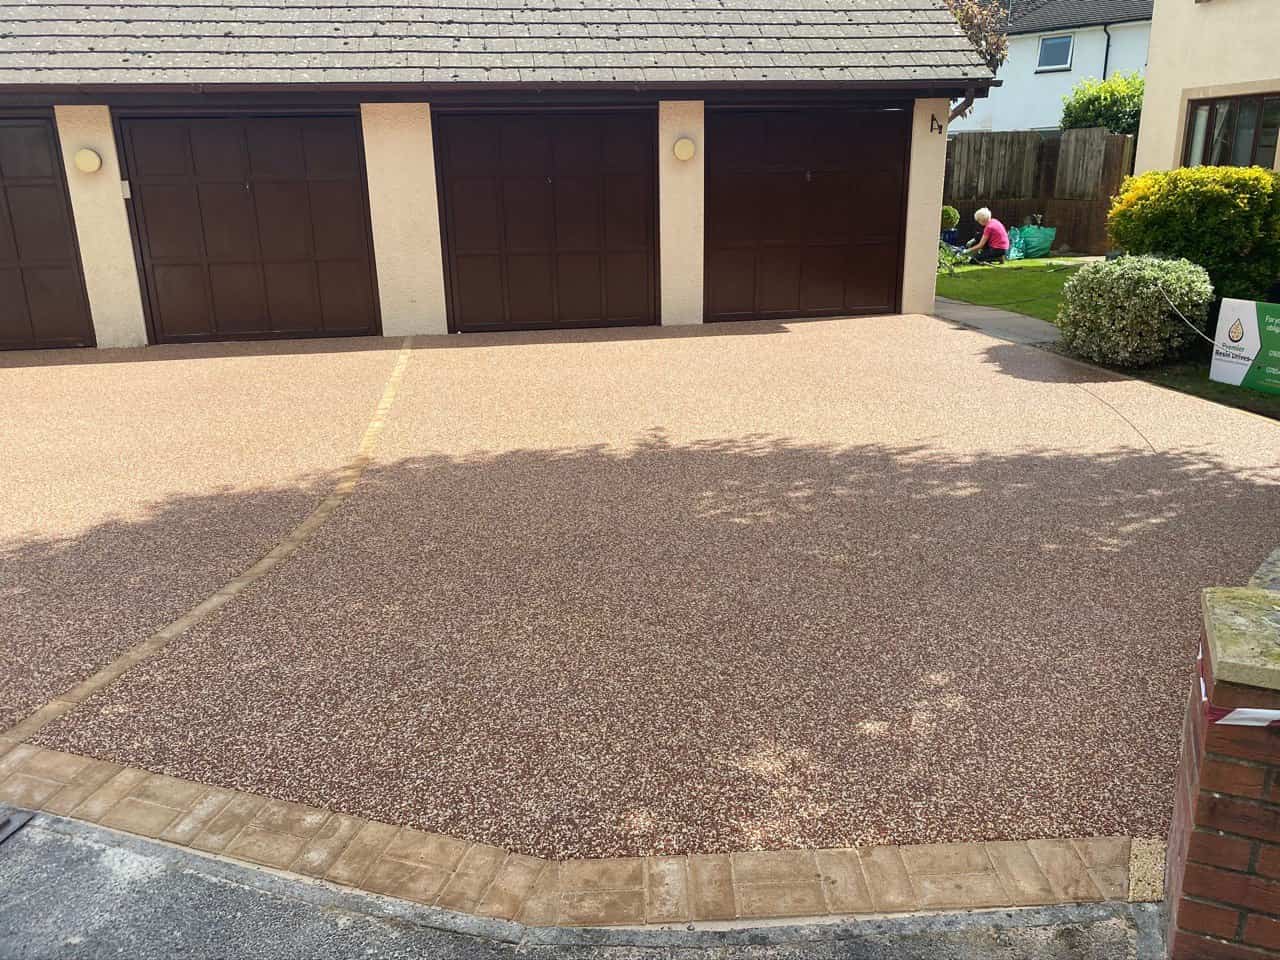 This is a photo of a resin driveway installed in Leeds by Leeds Resin Driveways